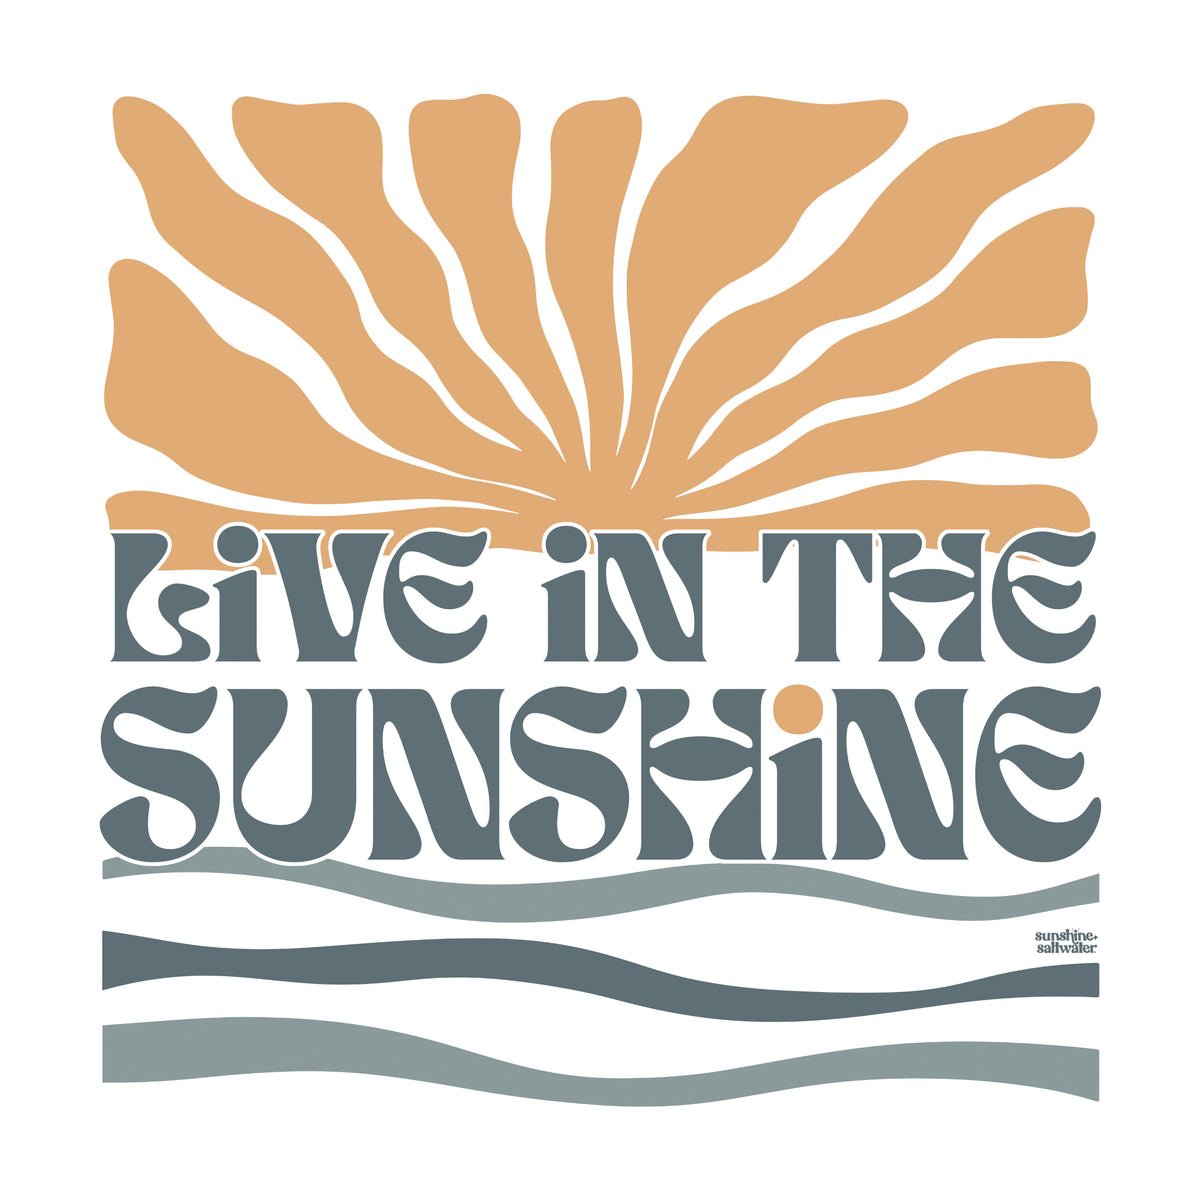 Live In The Sunshine | Beach Wall Hanging